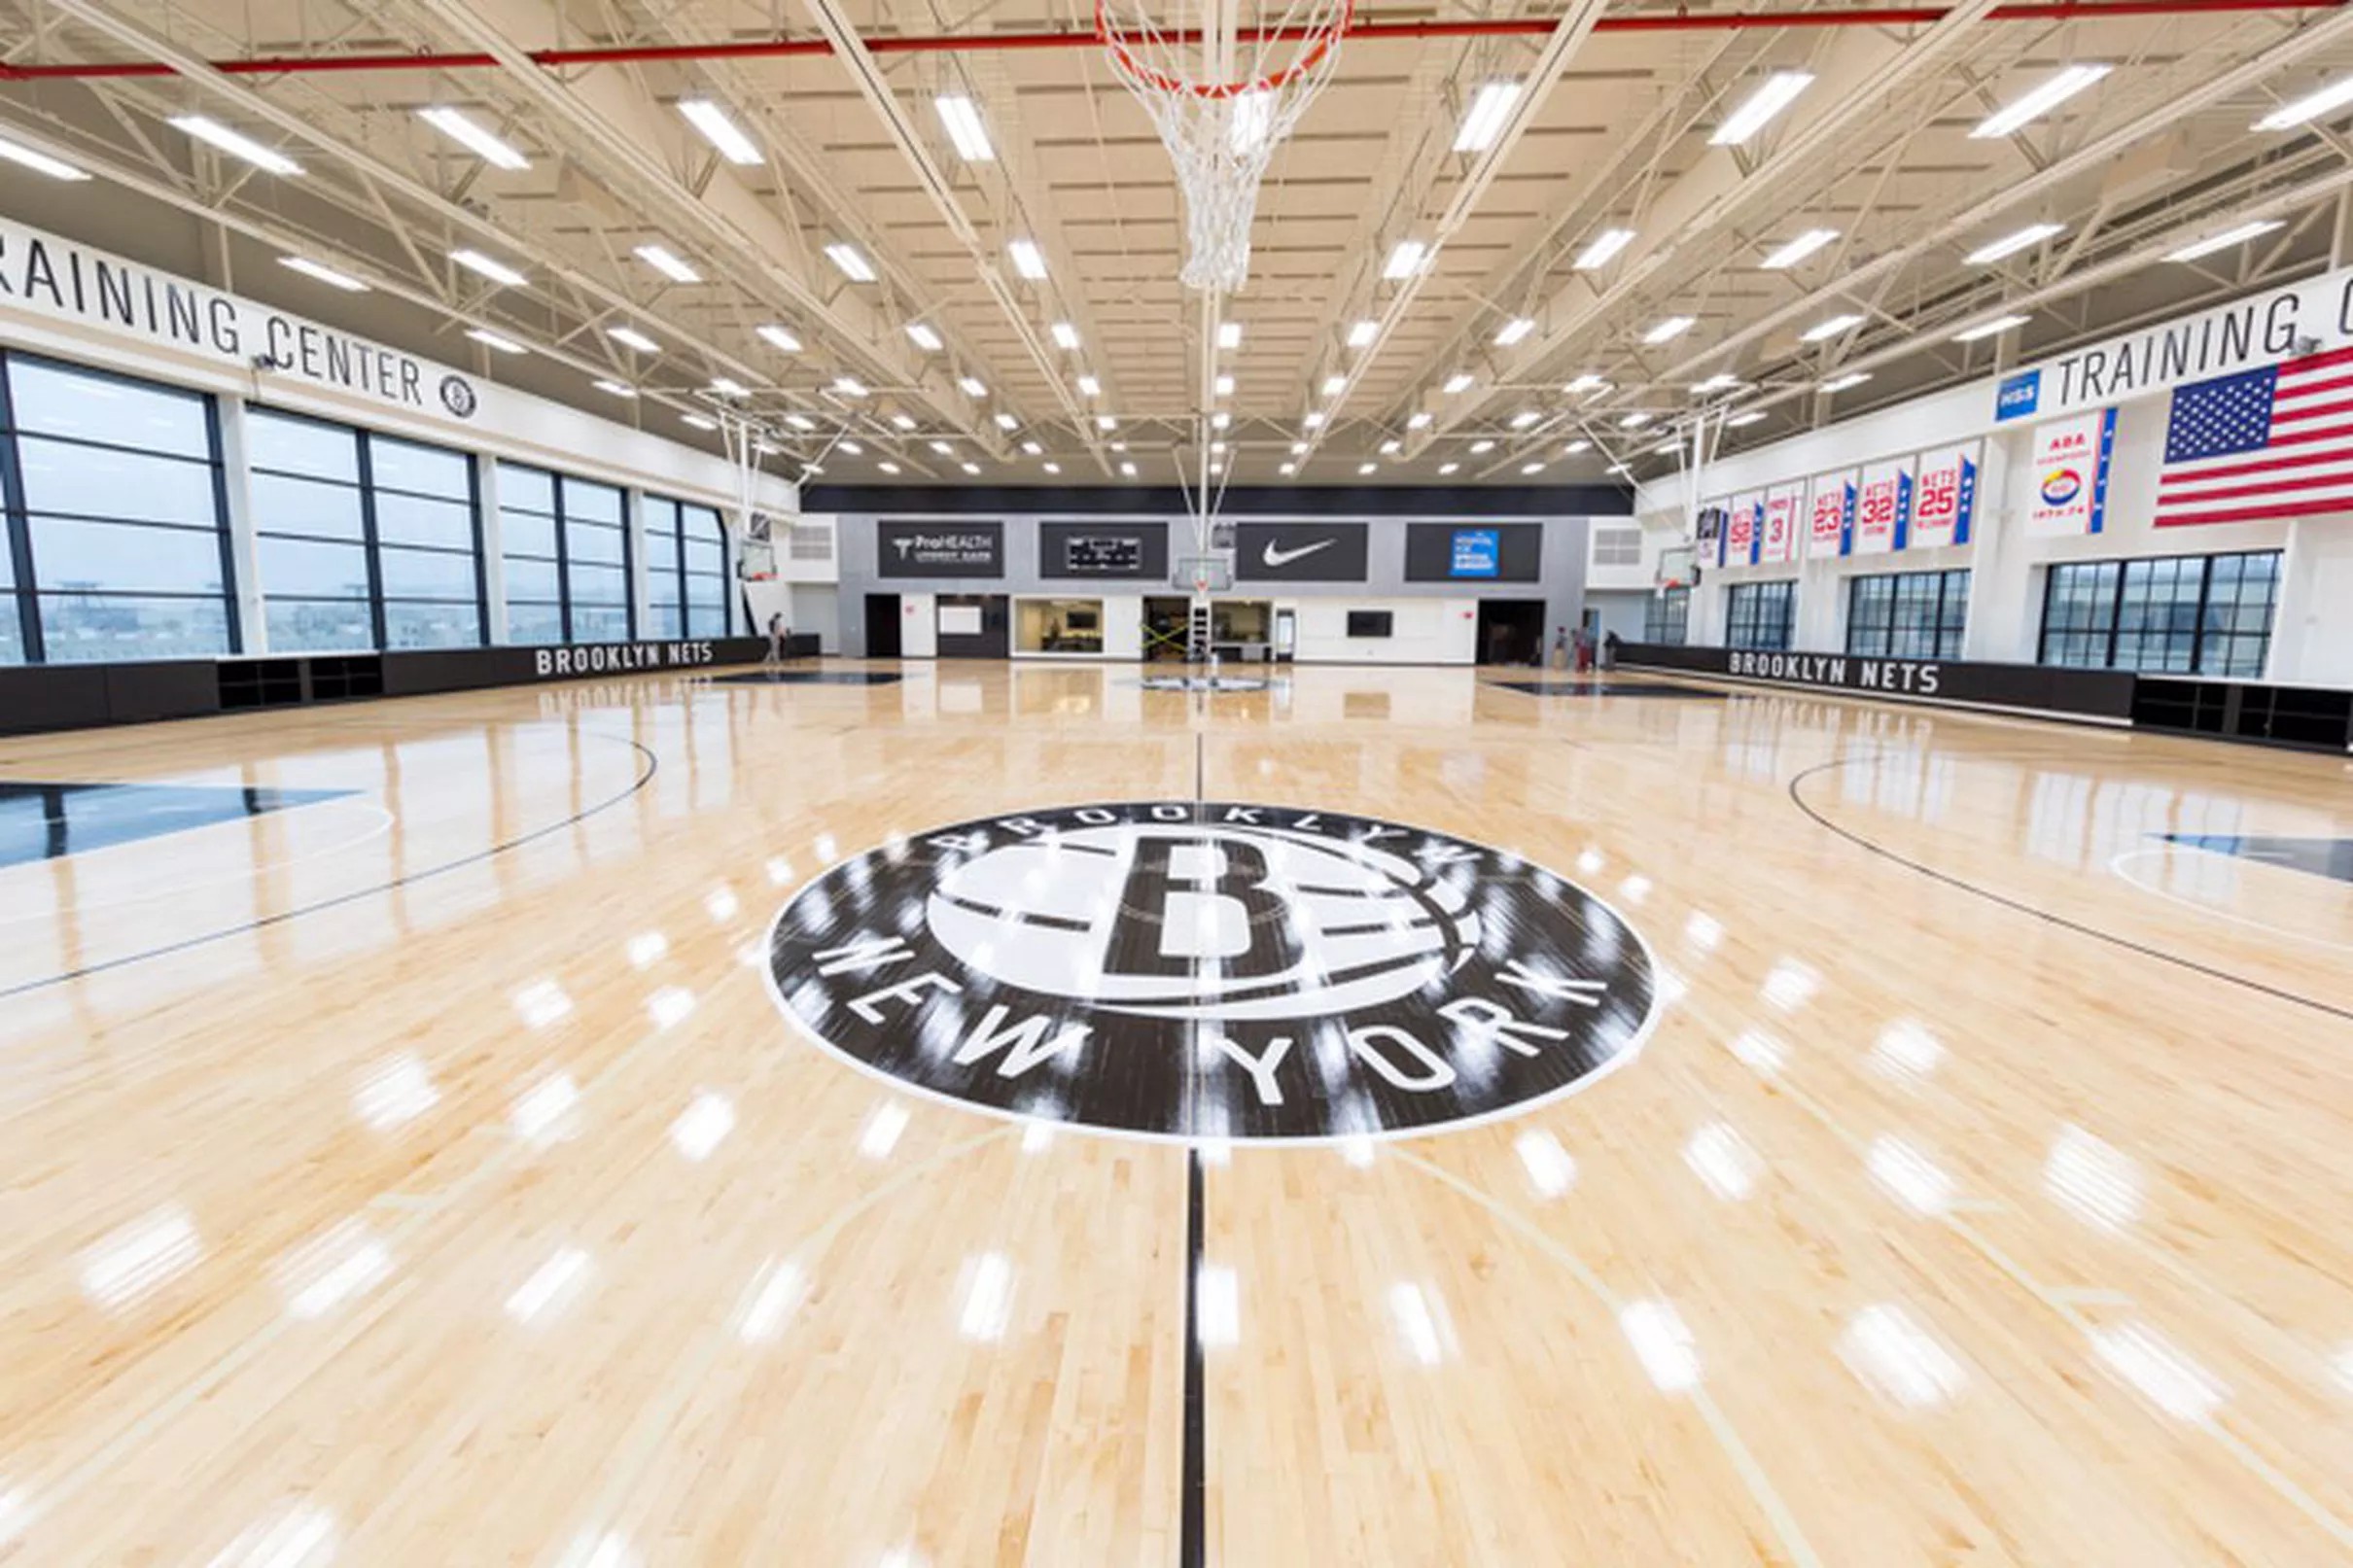 The (potential) impact of the Nets practice facility on future NBA players